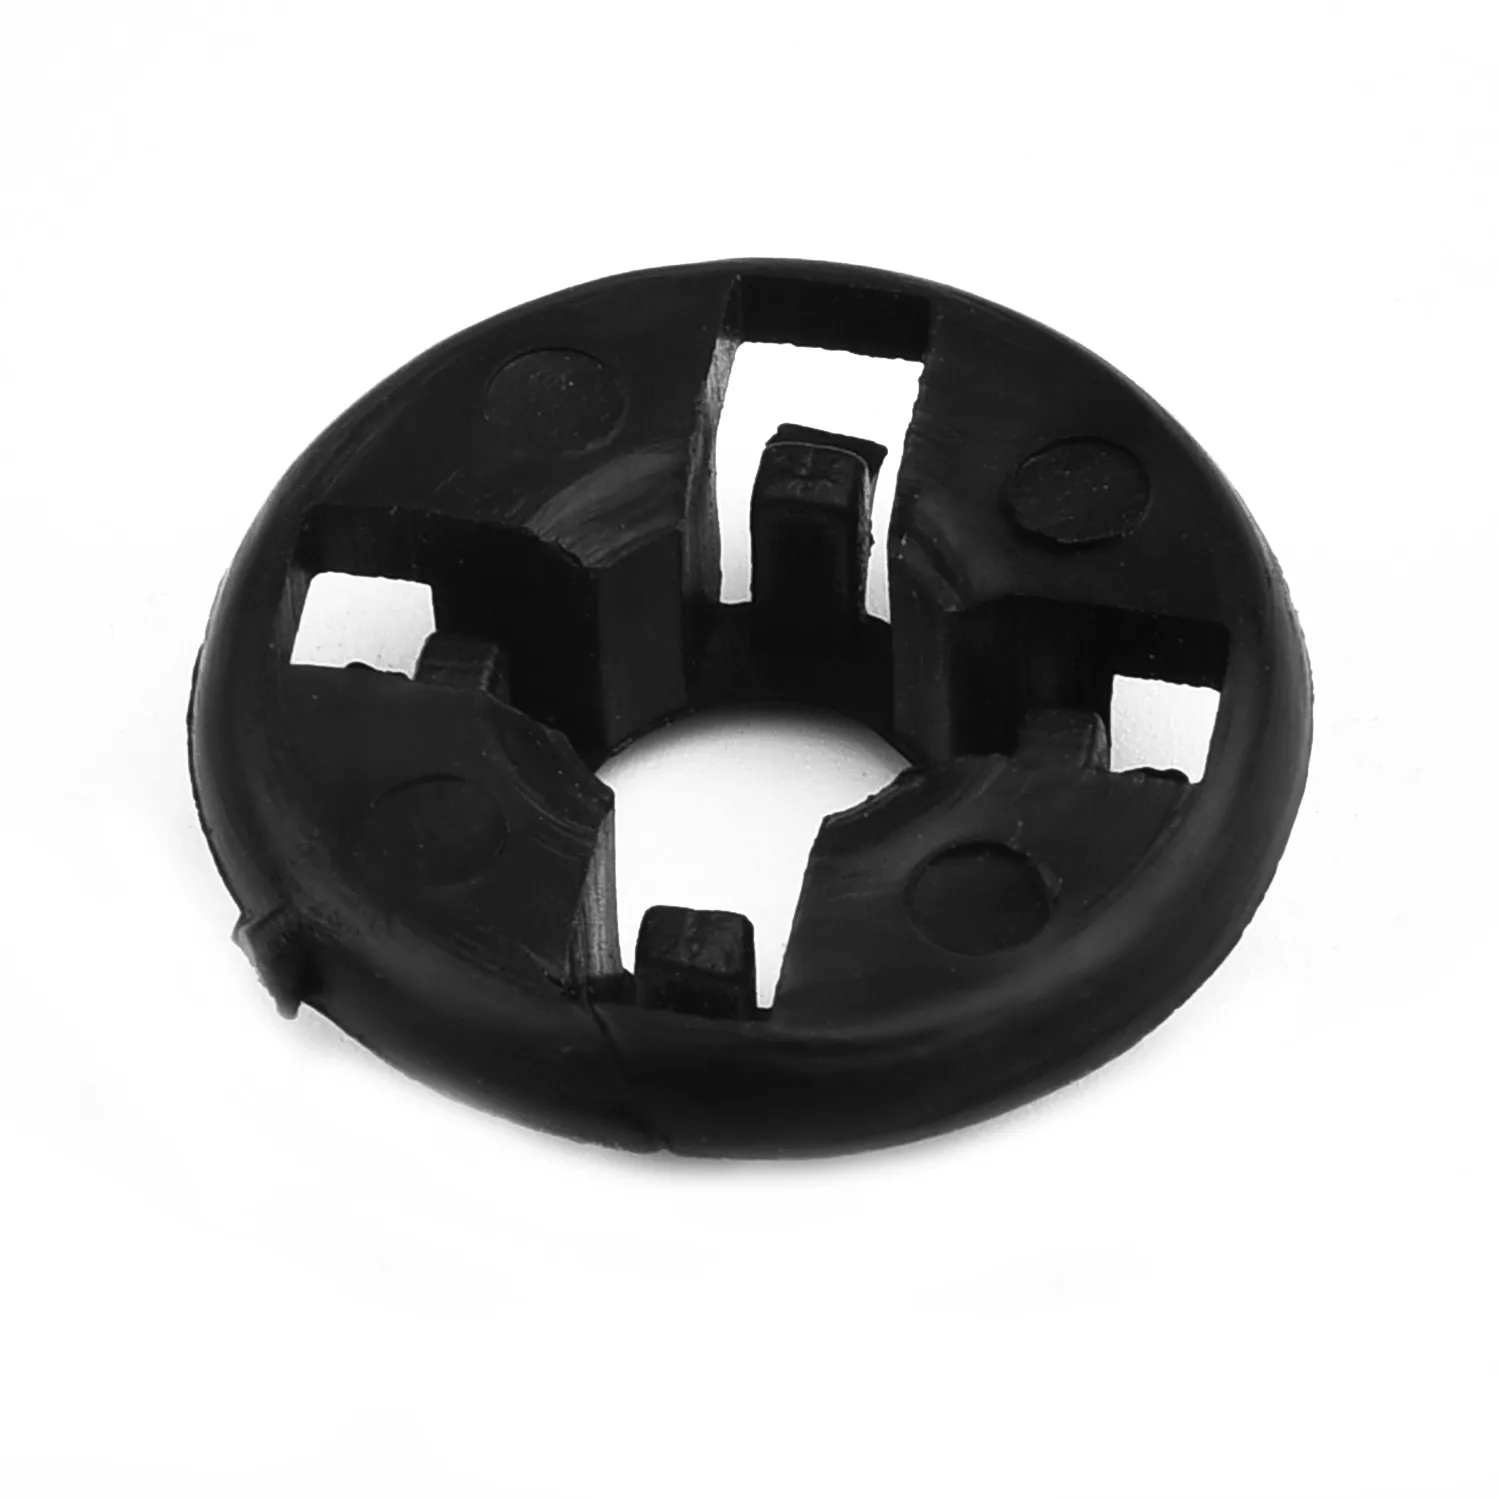 2pc Engine Hood Support Rod Bracket Clamp Ring Holder Clips Grommet For Toyota For Corolla For RAV4 For Scion XB Car Accessories